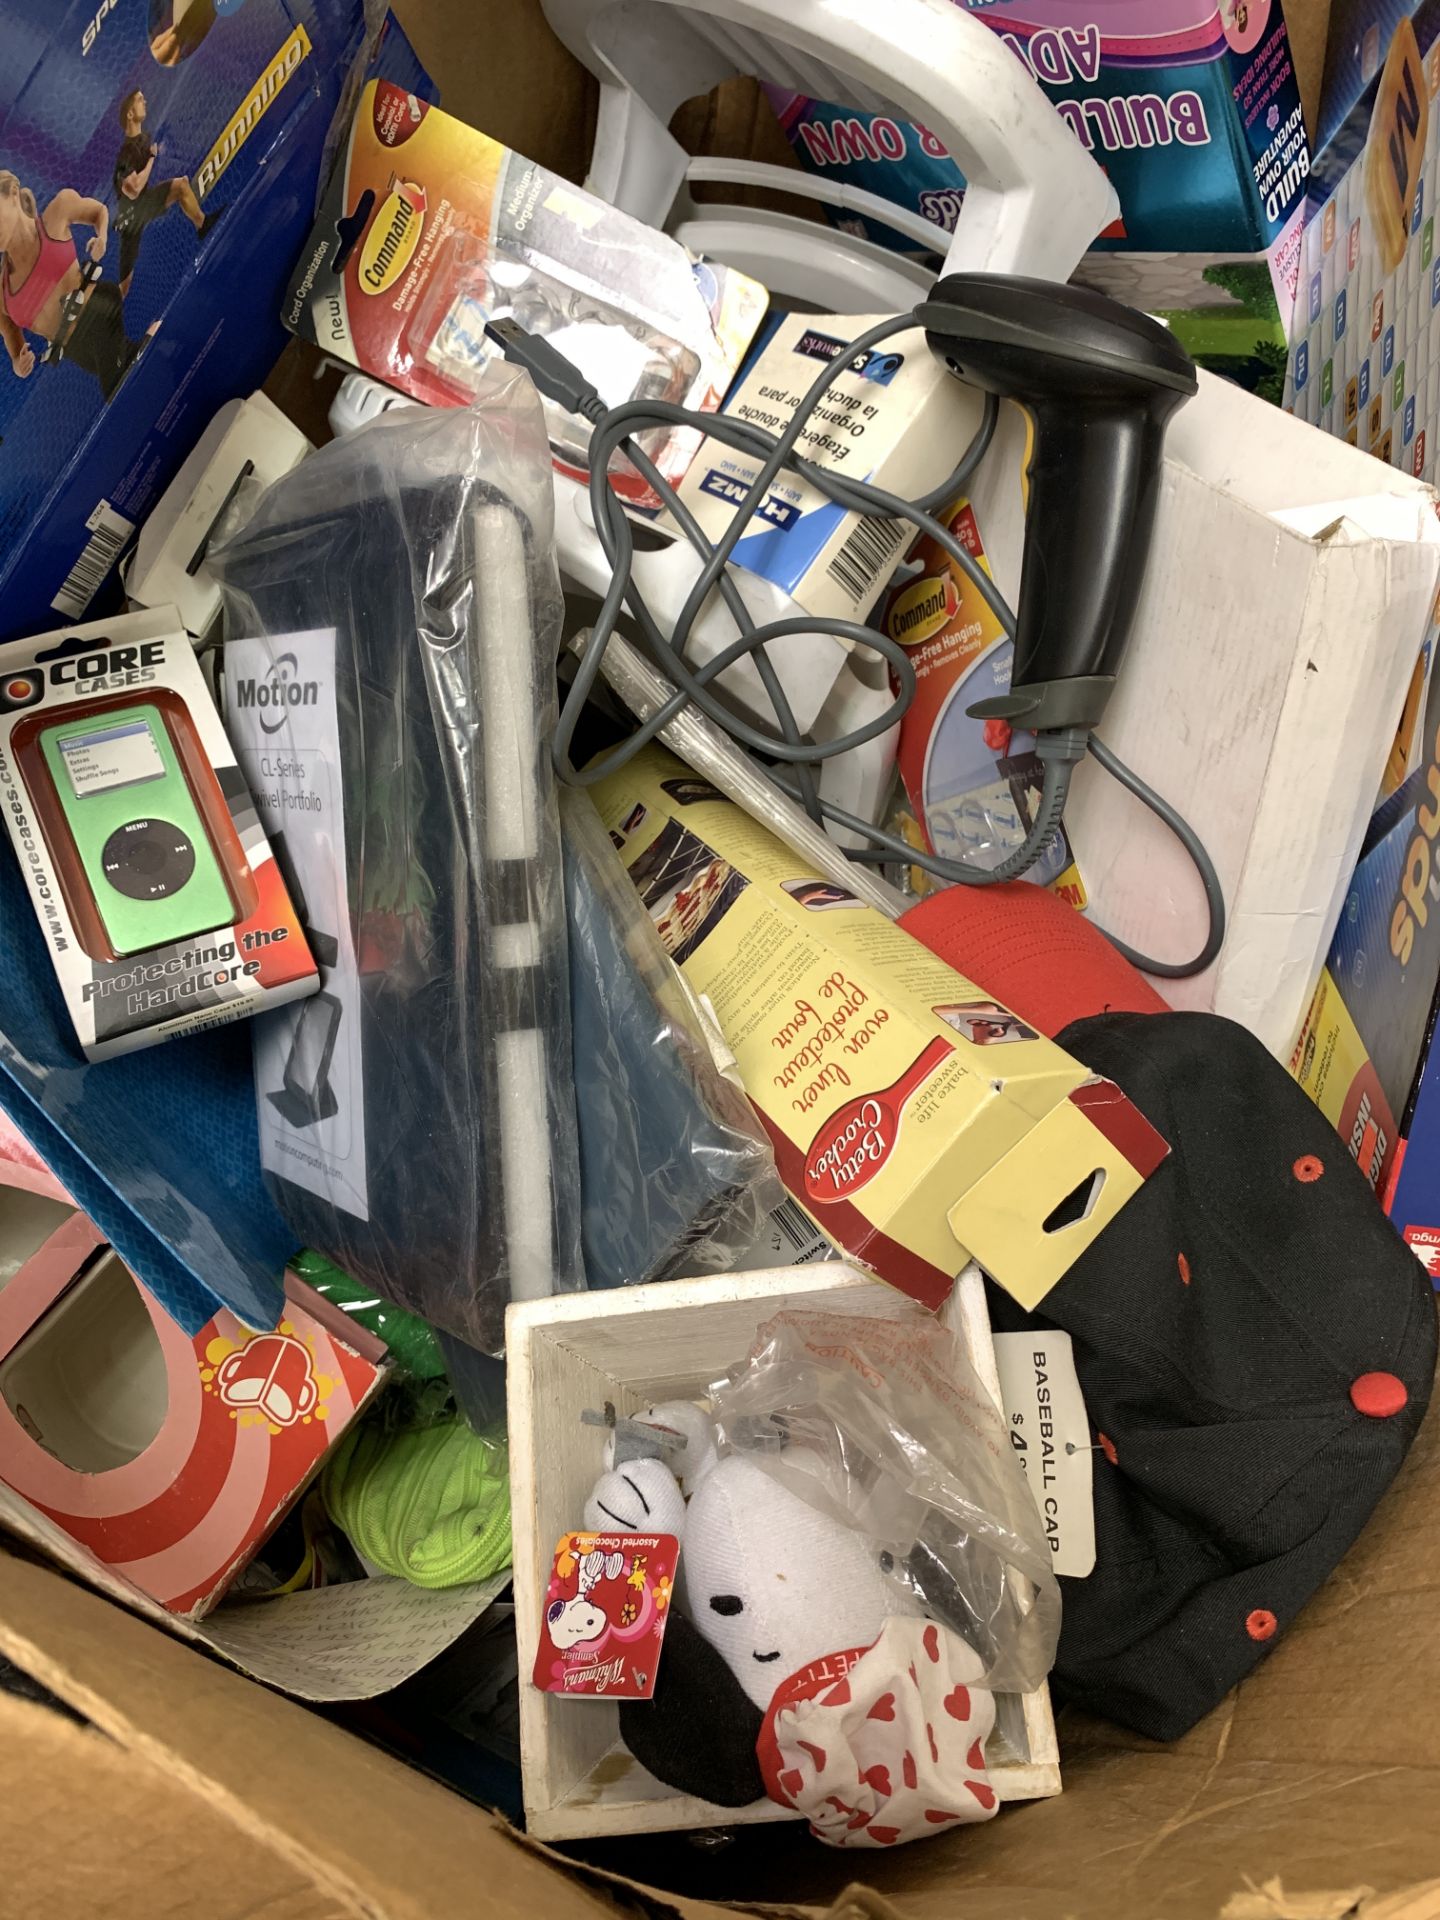 UNSORTED MIXED BOX OF MISC HOUSEHOLD GOODS, TOYS AND ACCESSORIES.  ABOUT 1-2 FEET DEEP OF PRODUCT - Image 2 of 2